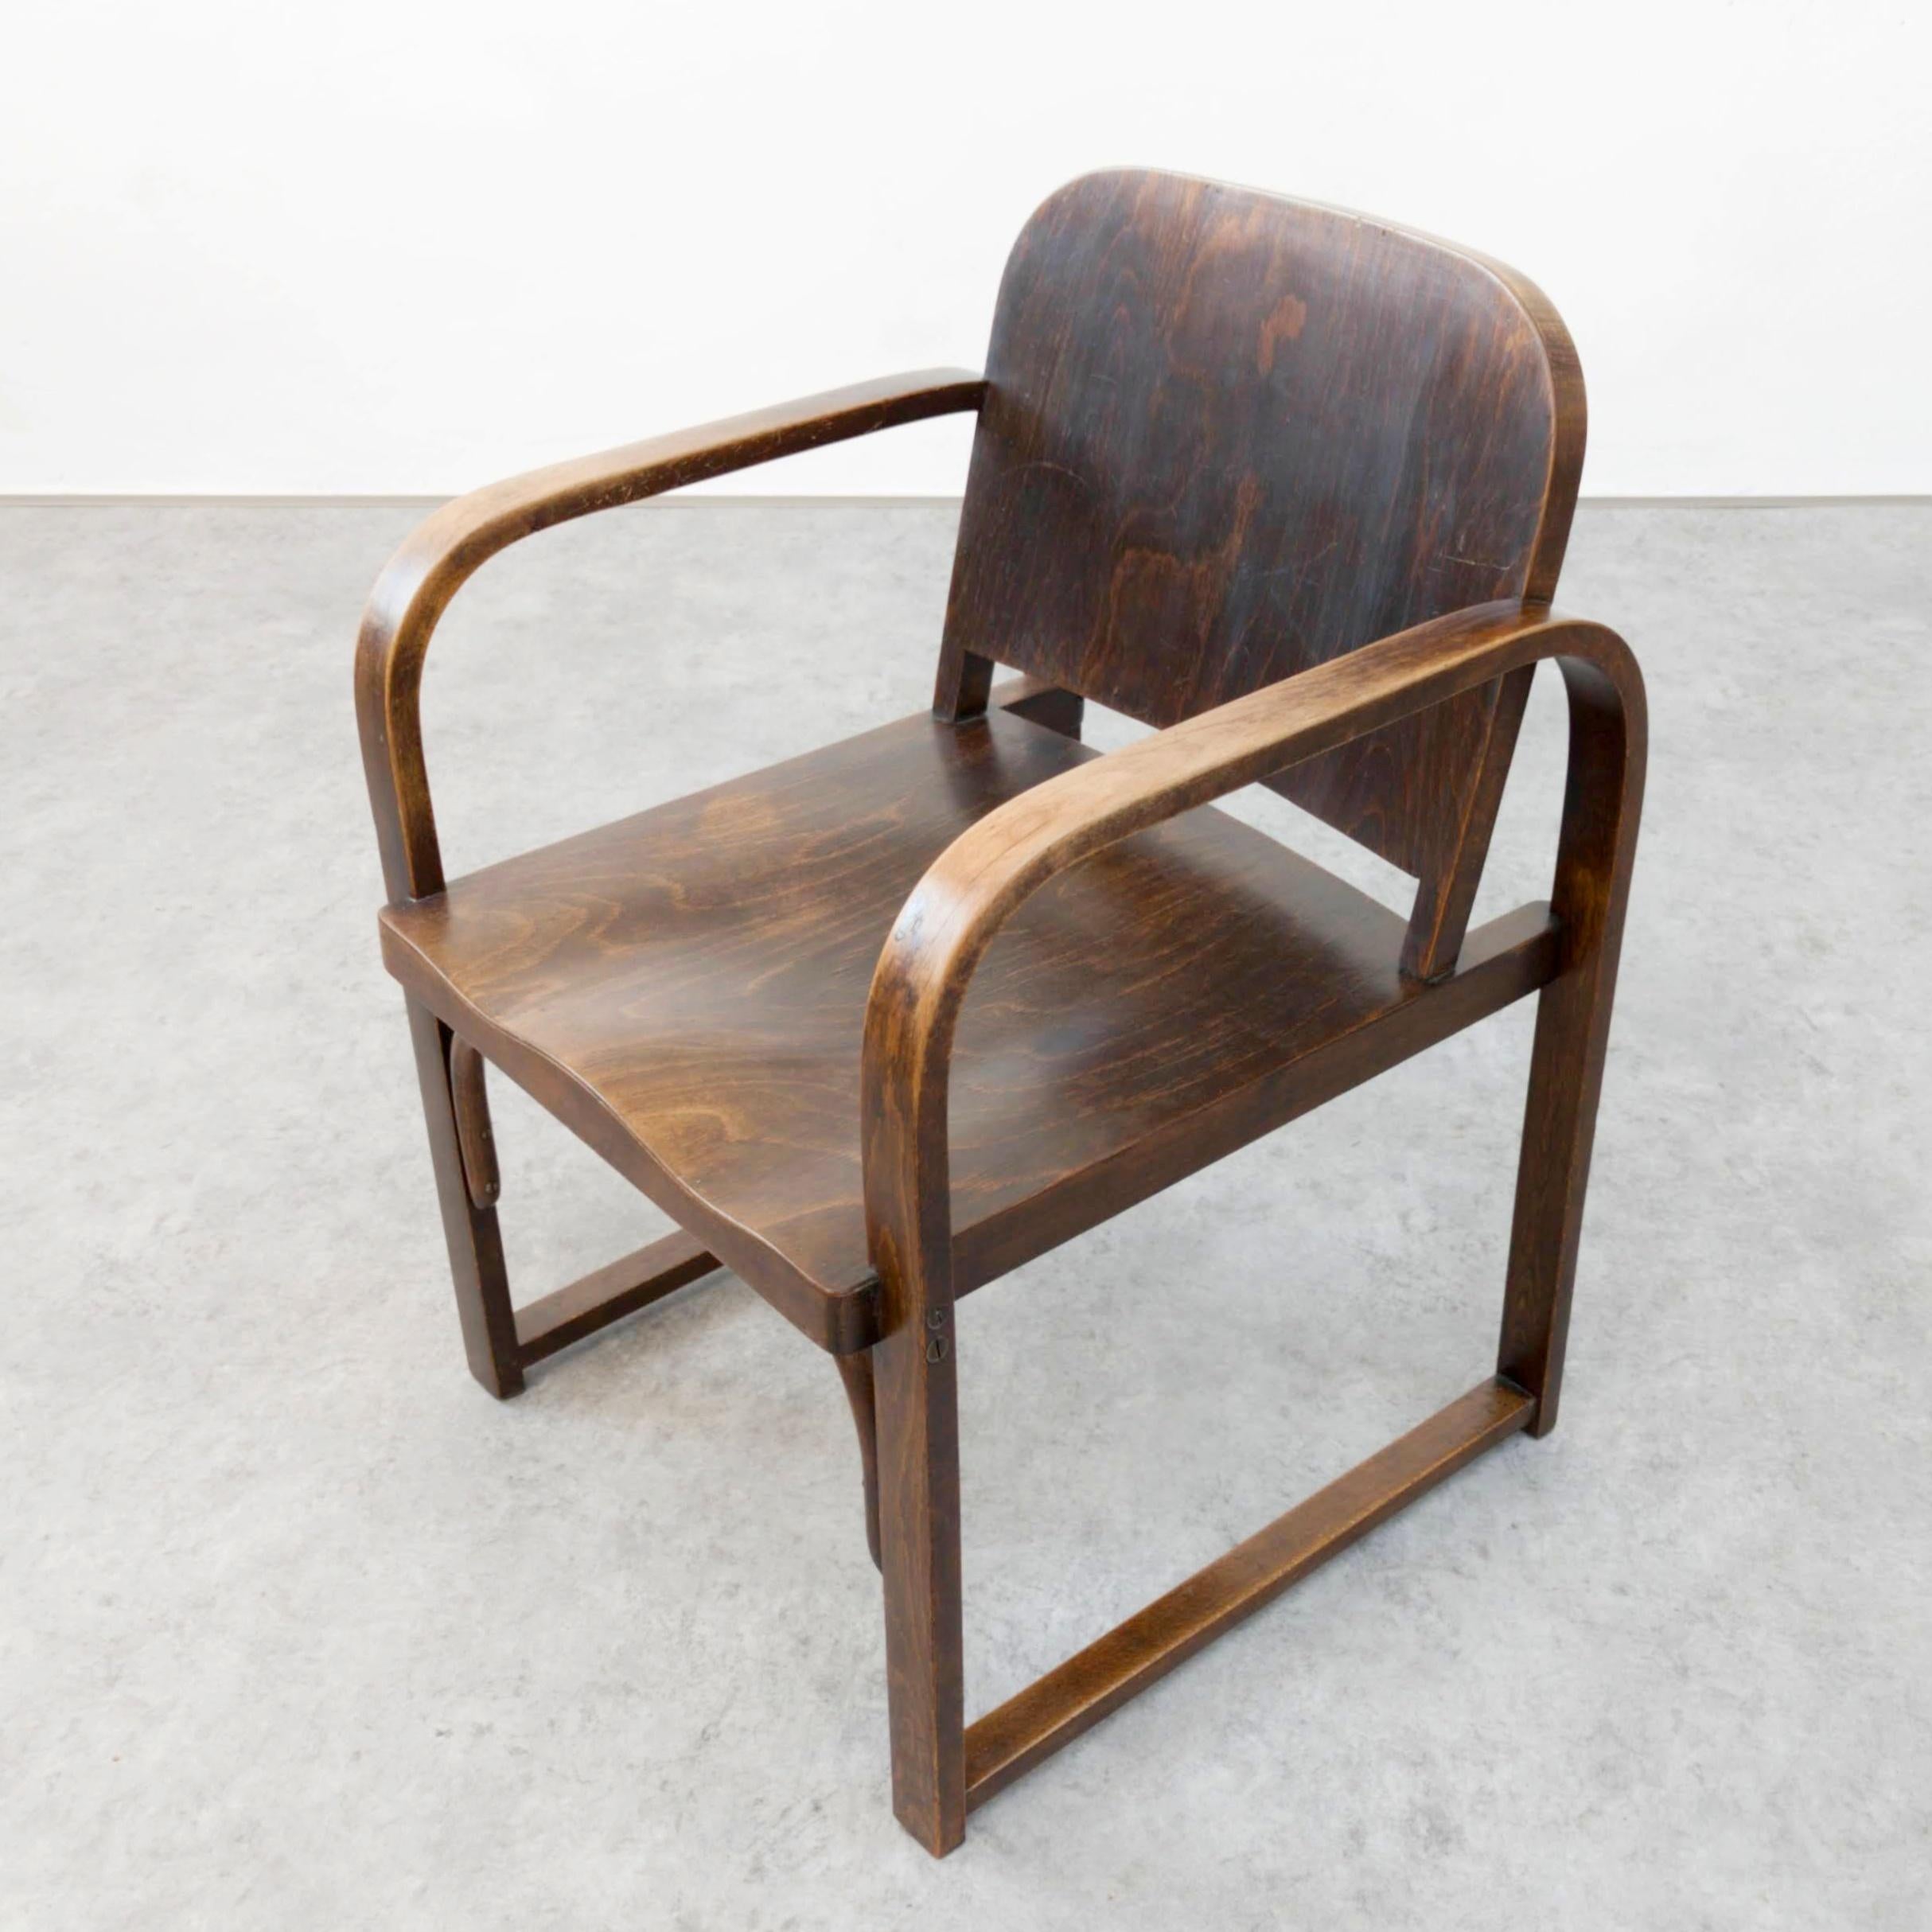 Mid-20th Century Modernist Thonet a 745/F Bentwood Armchair For Sale